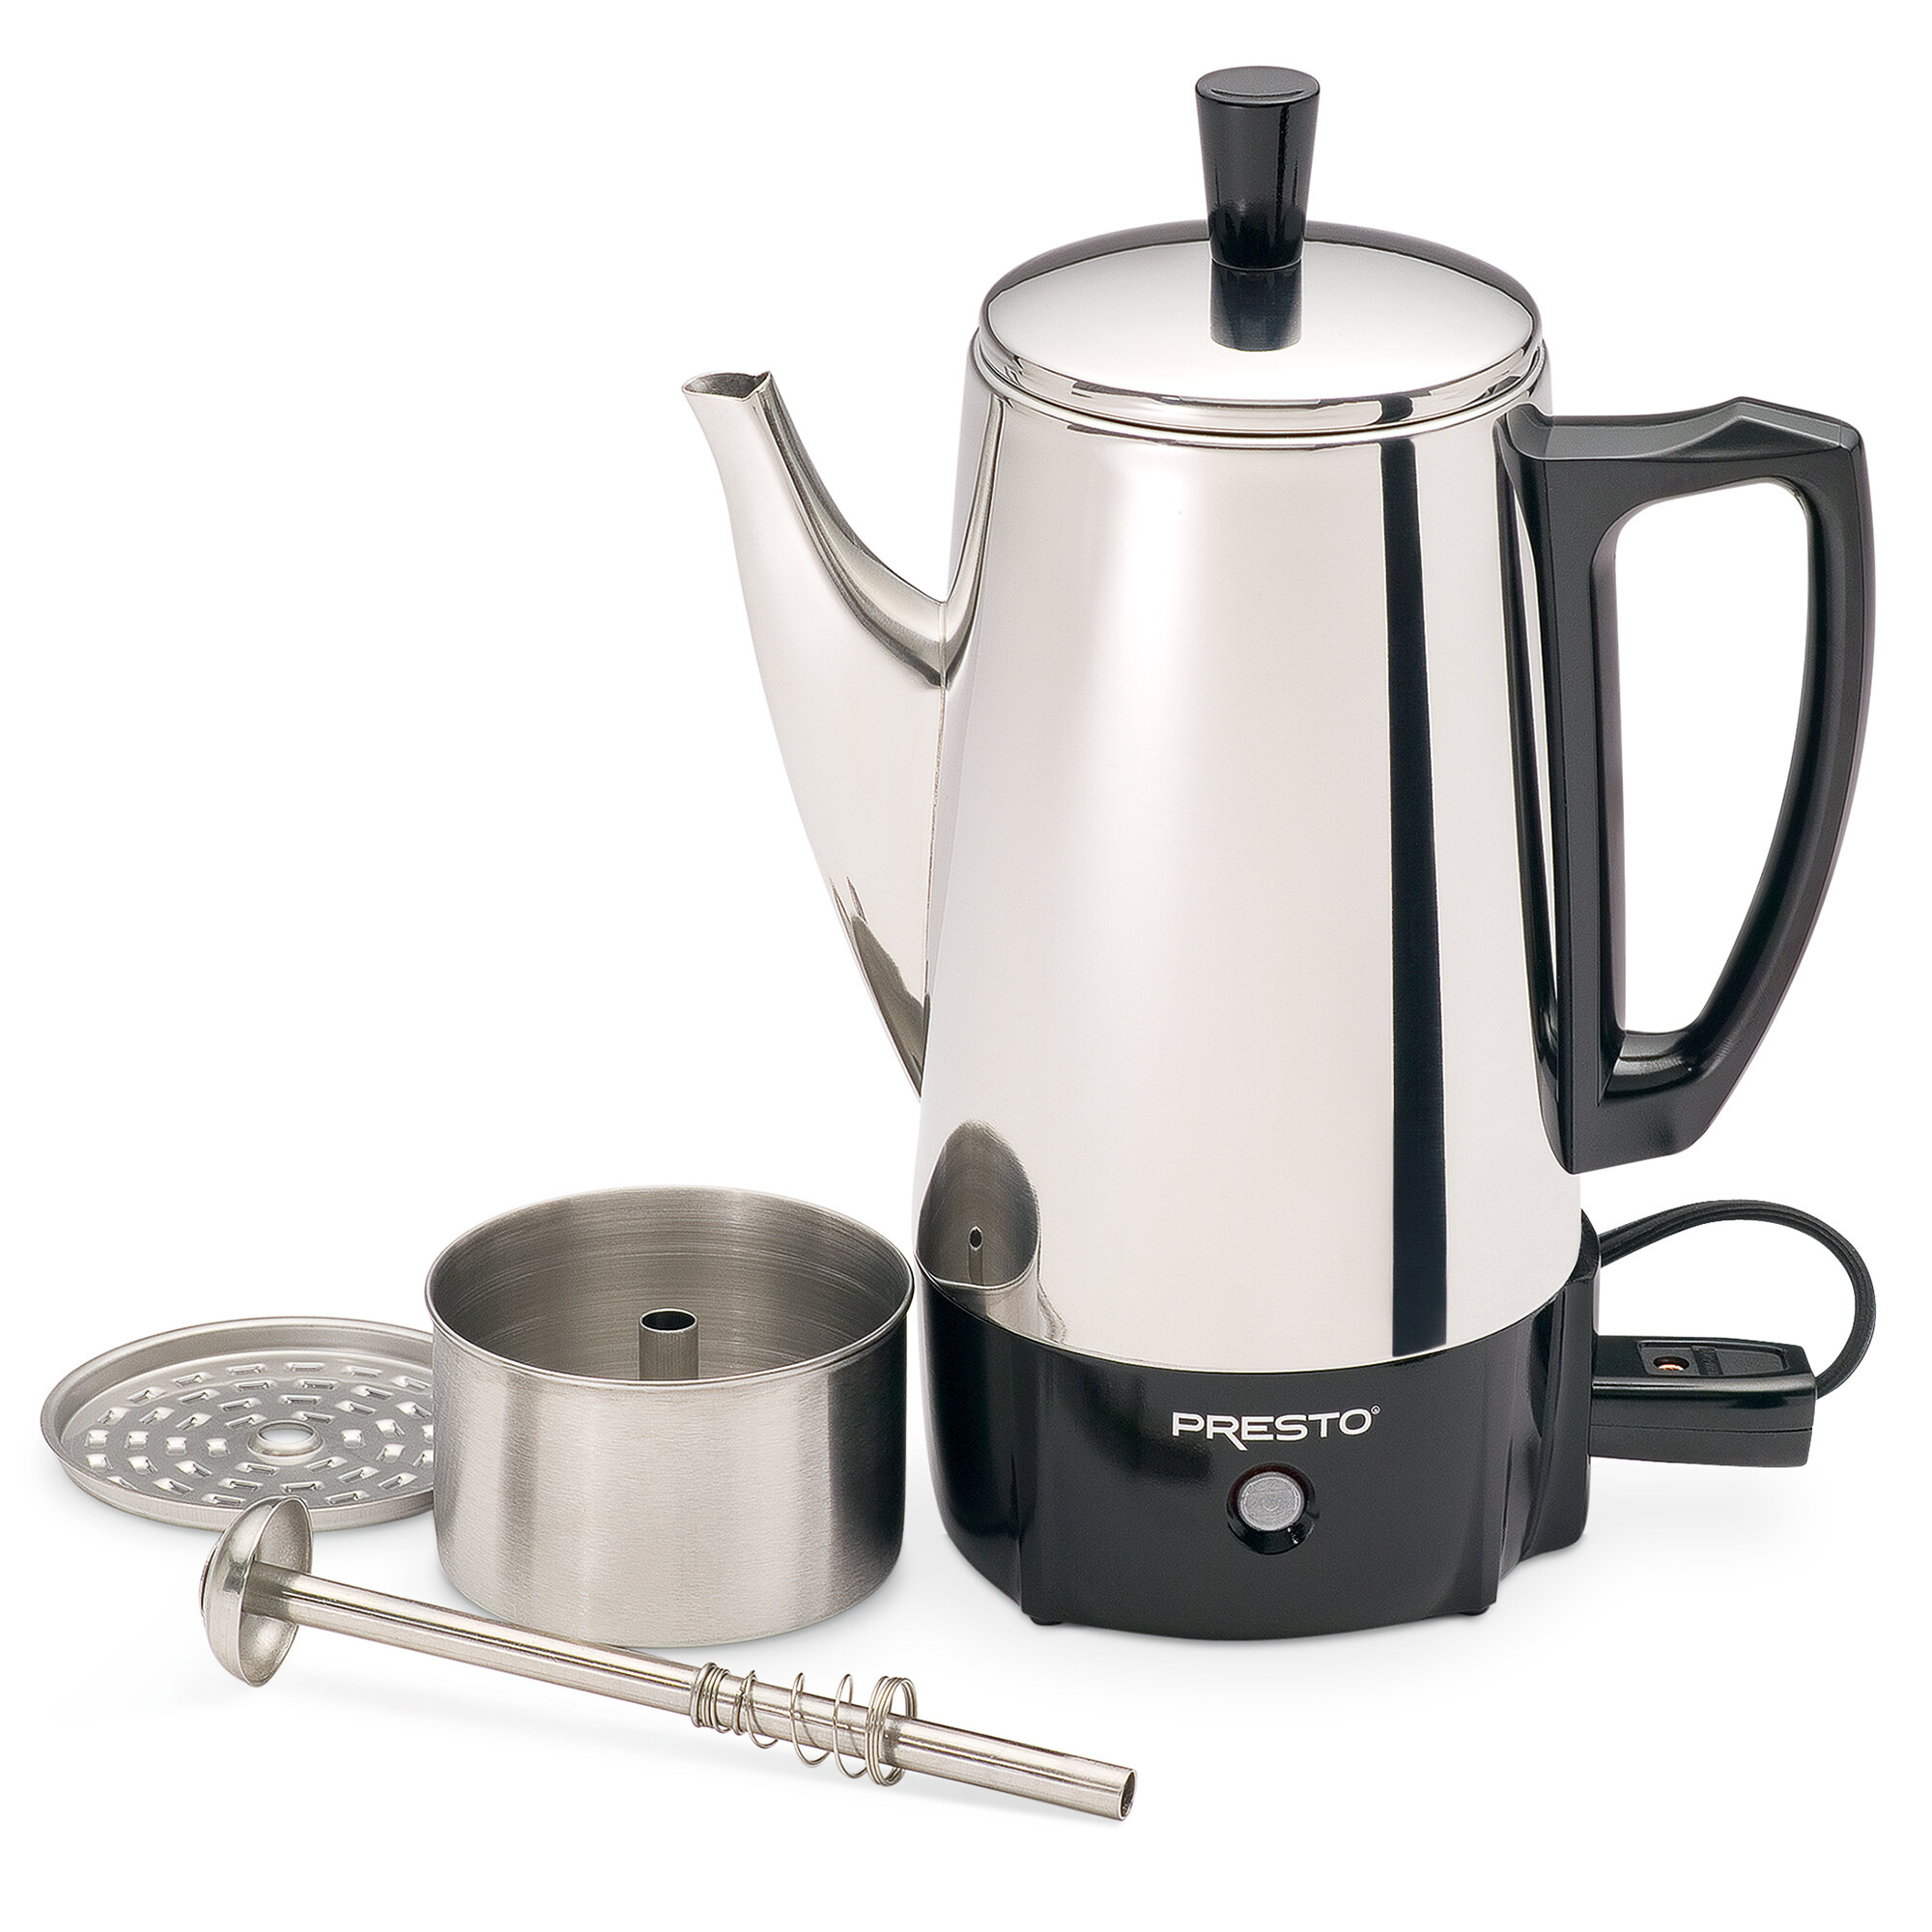 Presto 02811 12-Cup Stainless Steel Coffee Maker 12 Cup, Silver